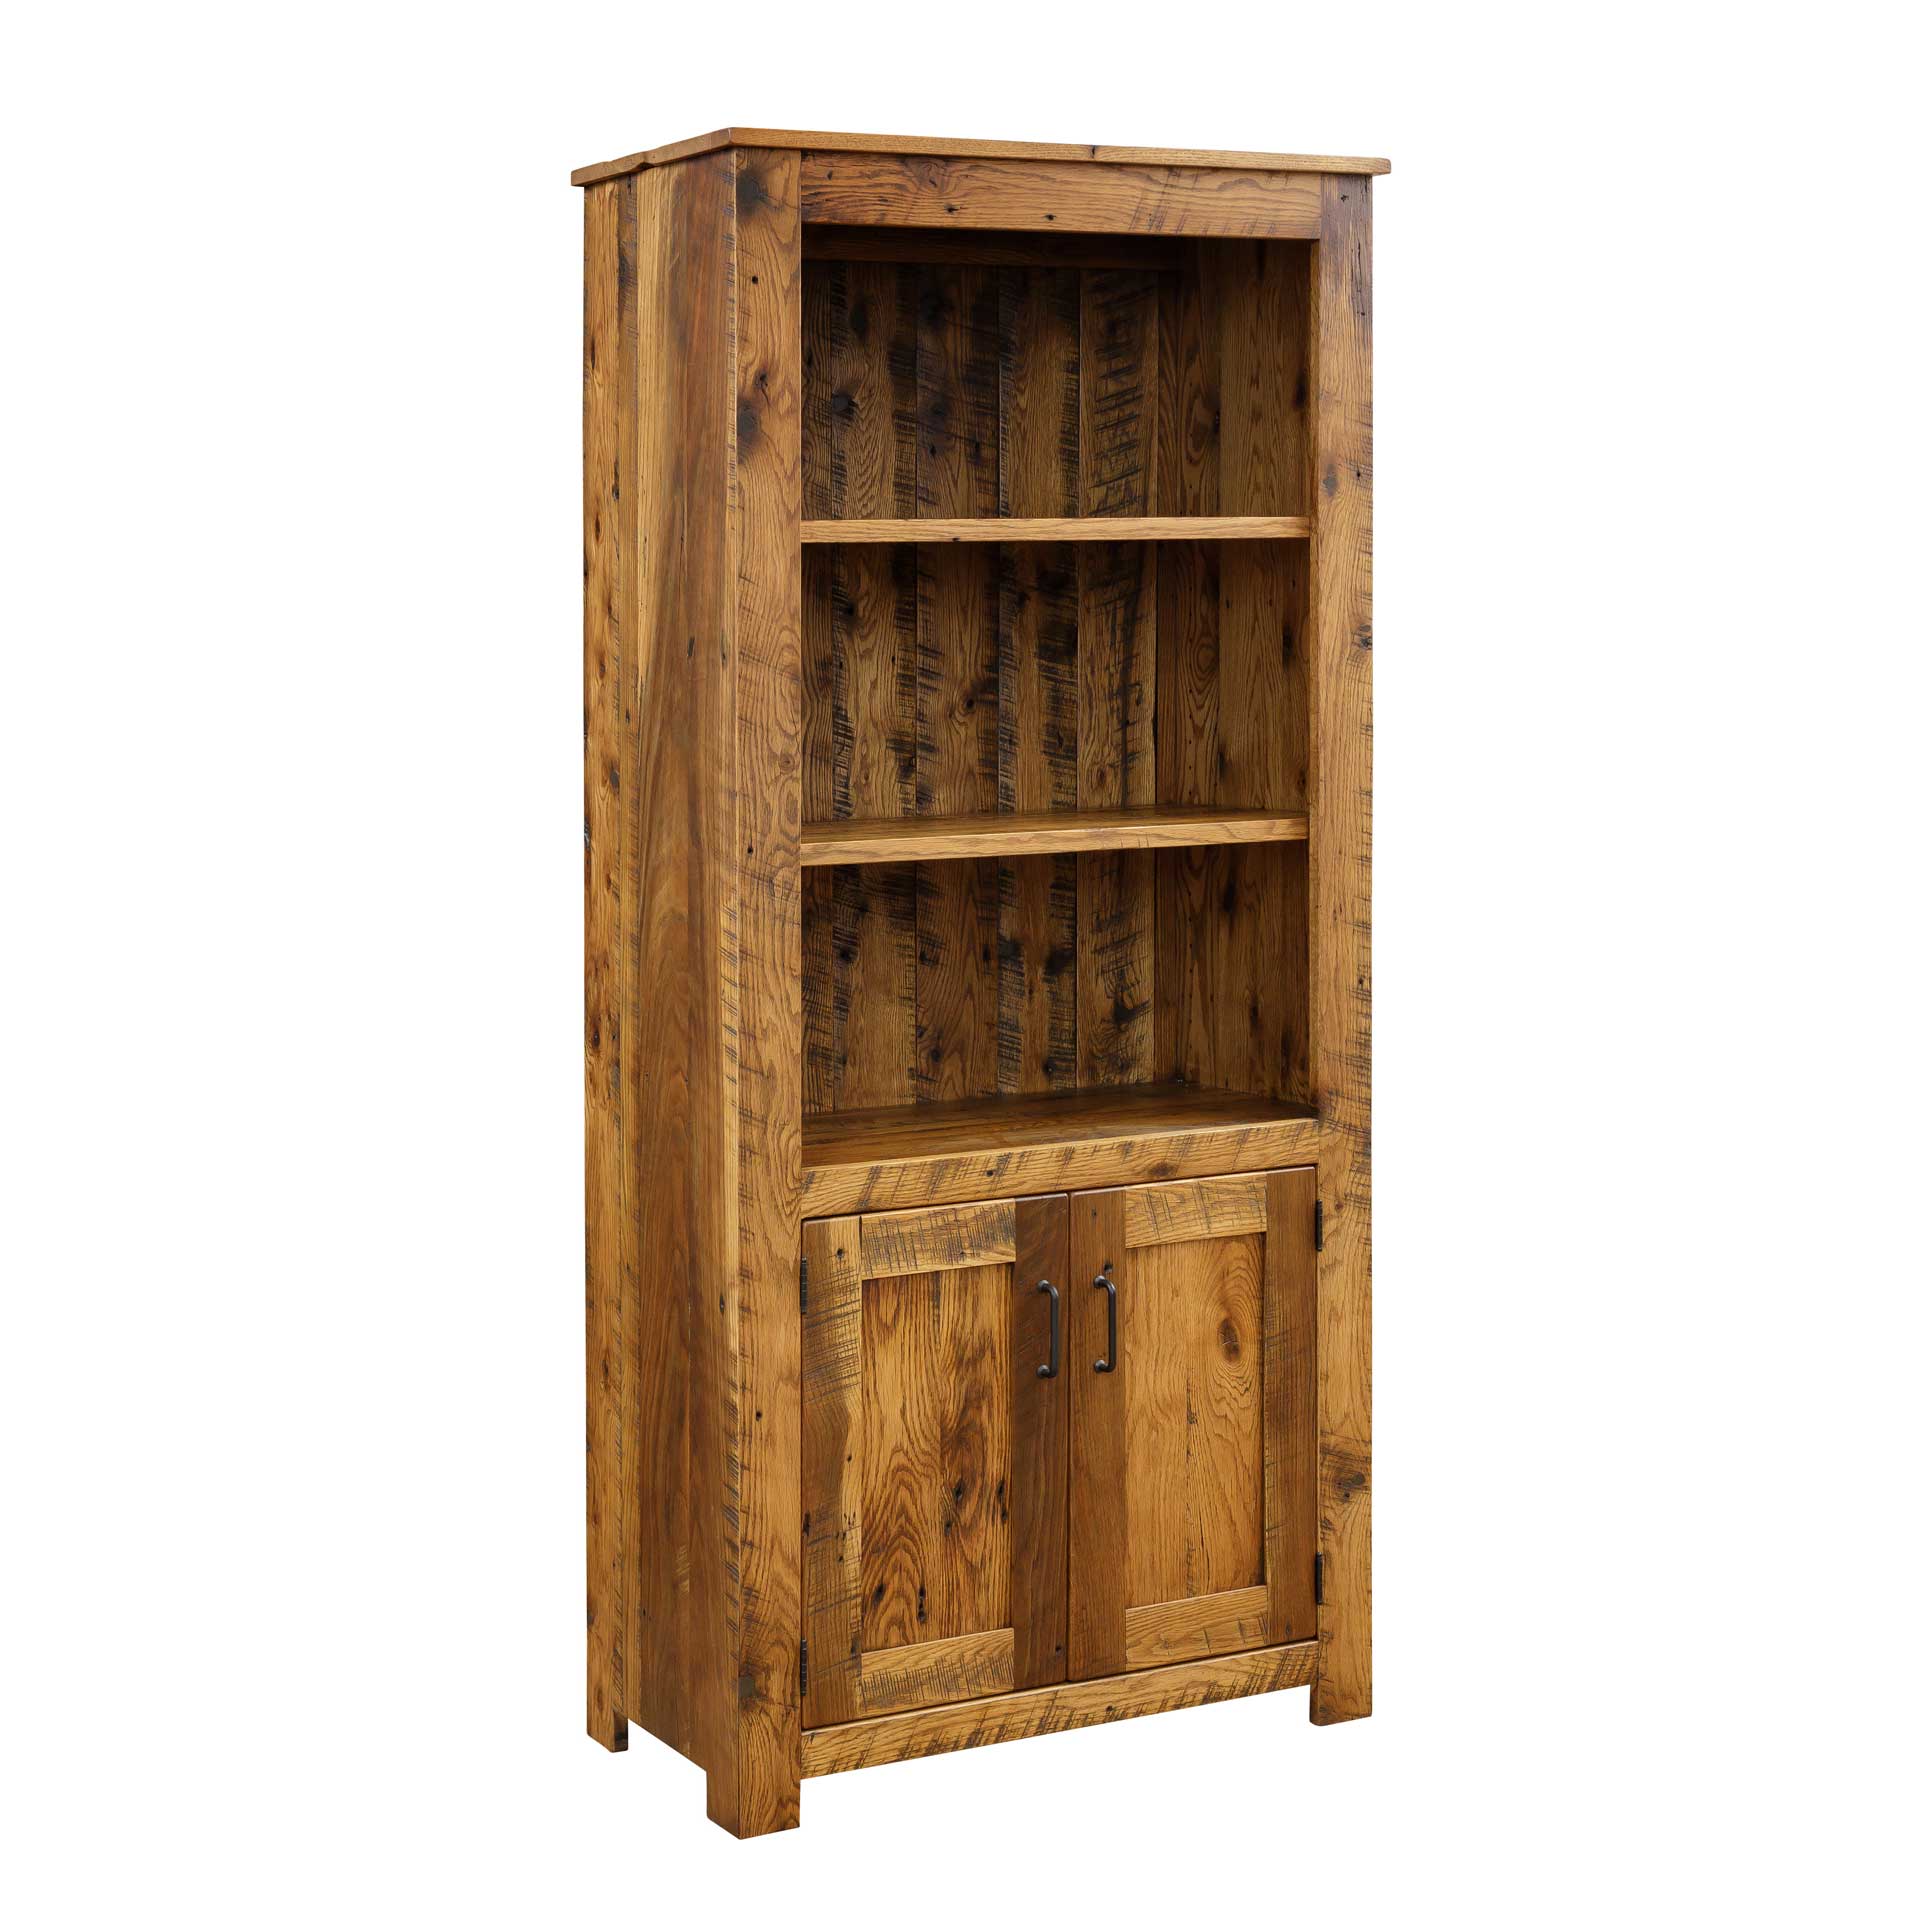 Urban Lodge Barnwood Bookcase with Doors - snyders.furniture